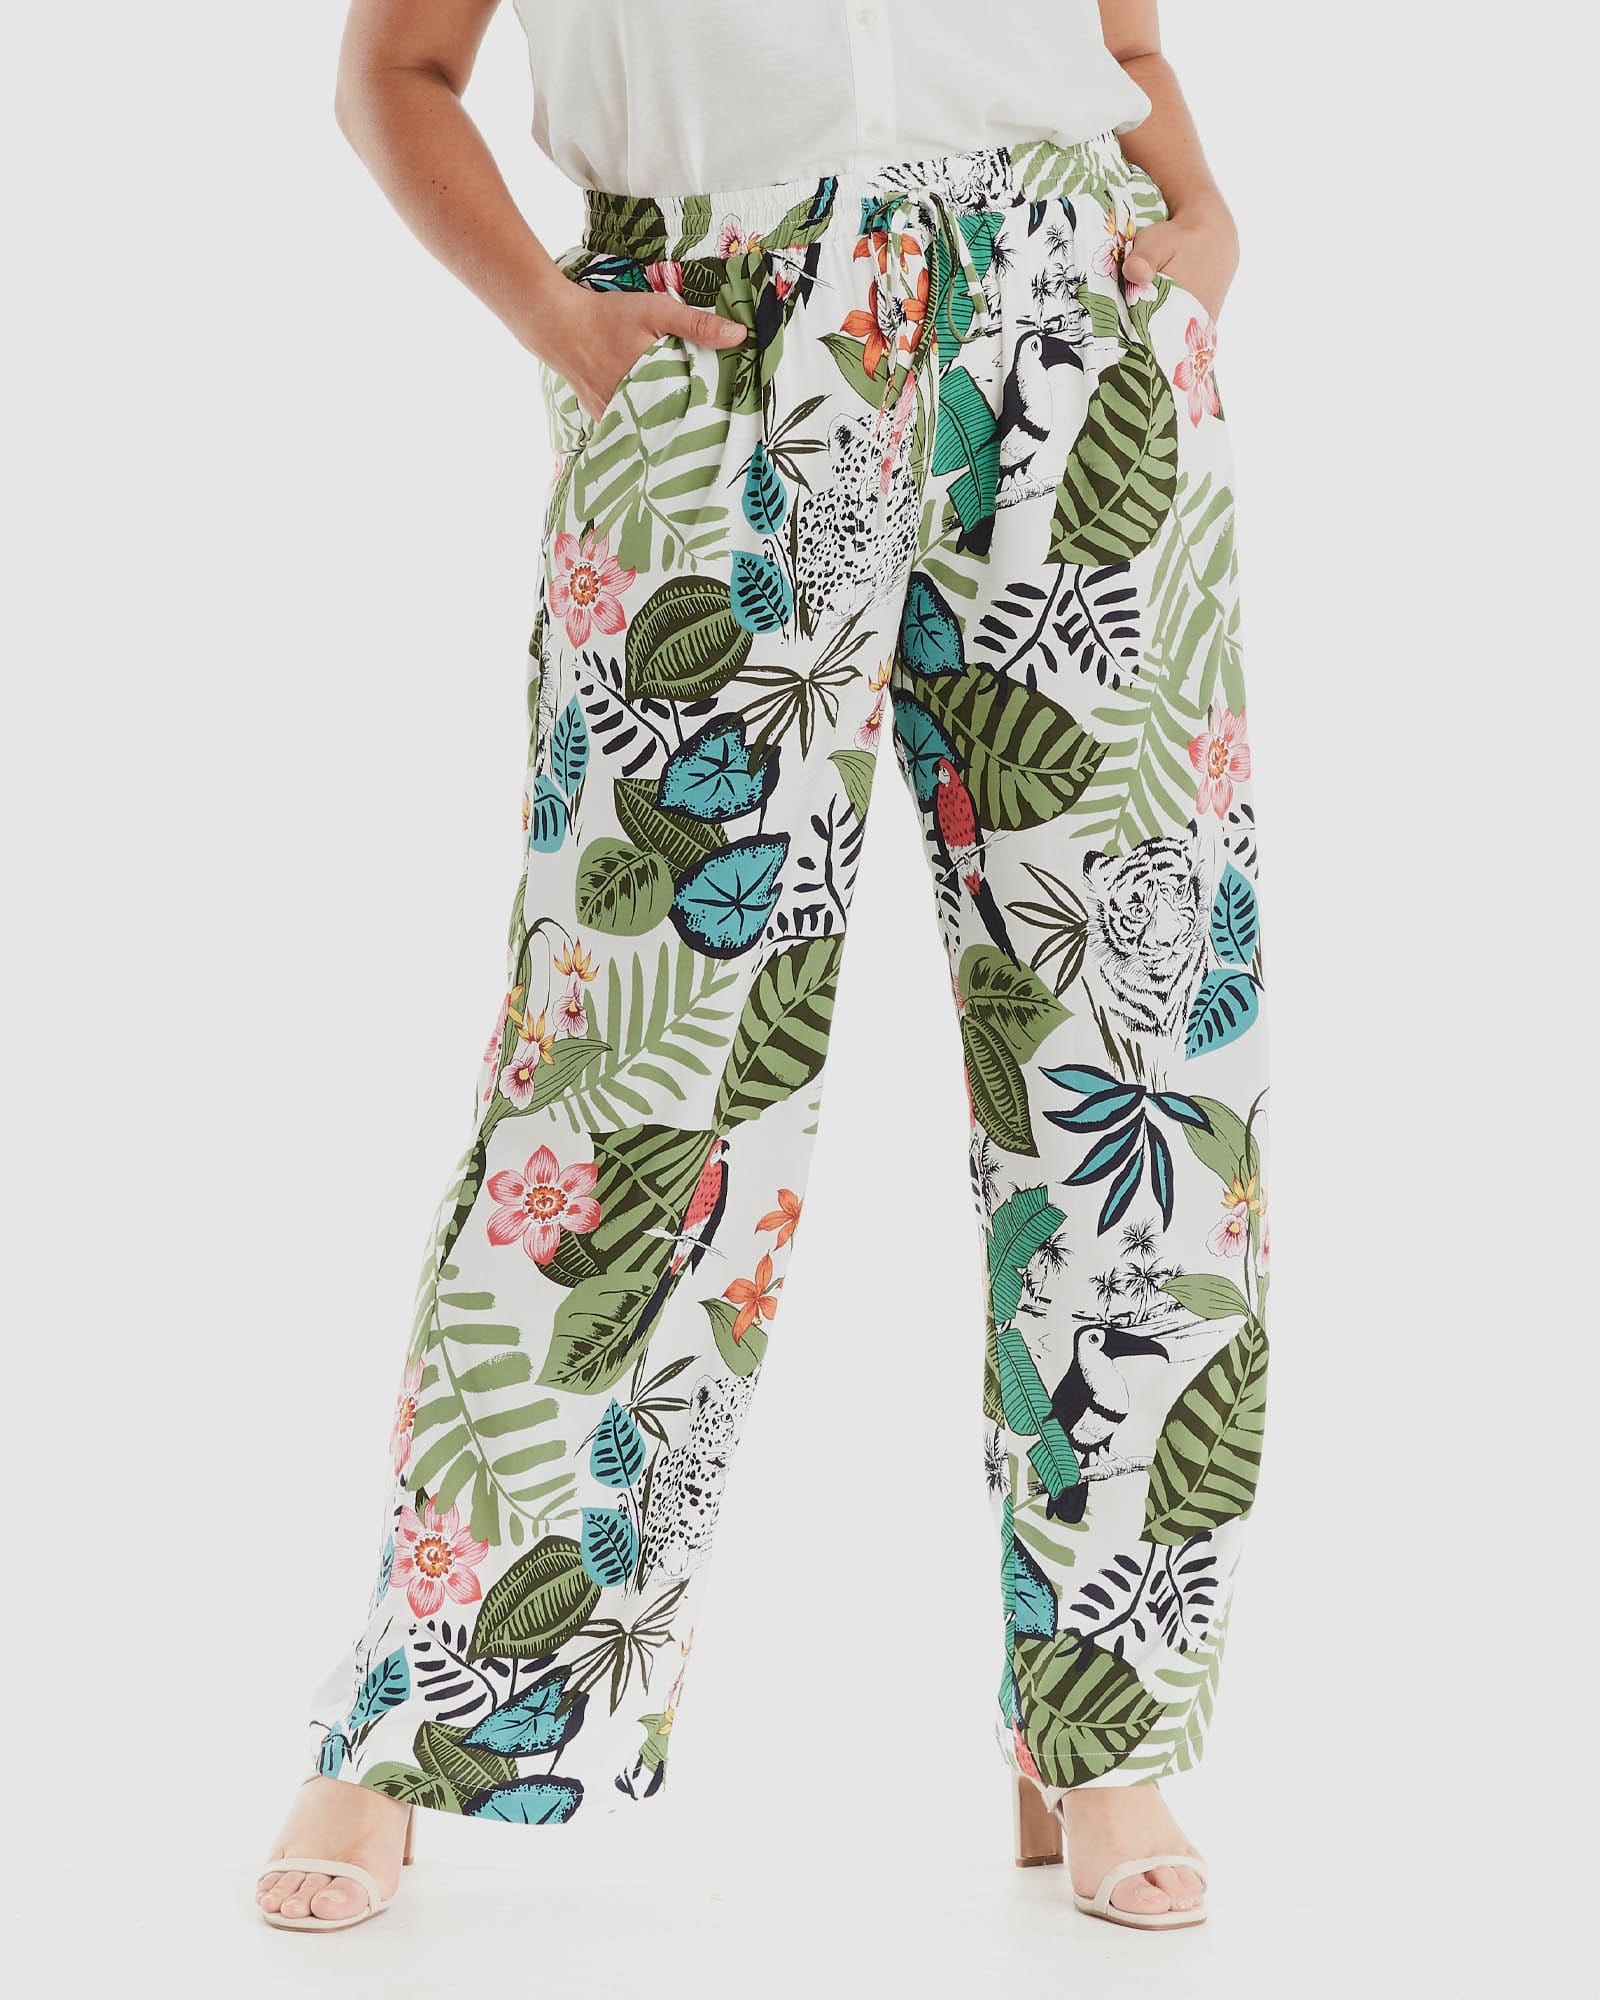 Plus Size Super Soft Tropical Printed Leggings One Size Fits Most Plus  White Tropical Flower - White Mark